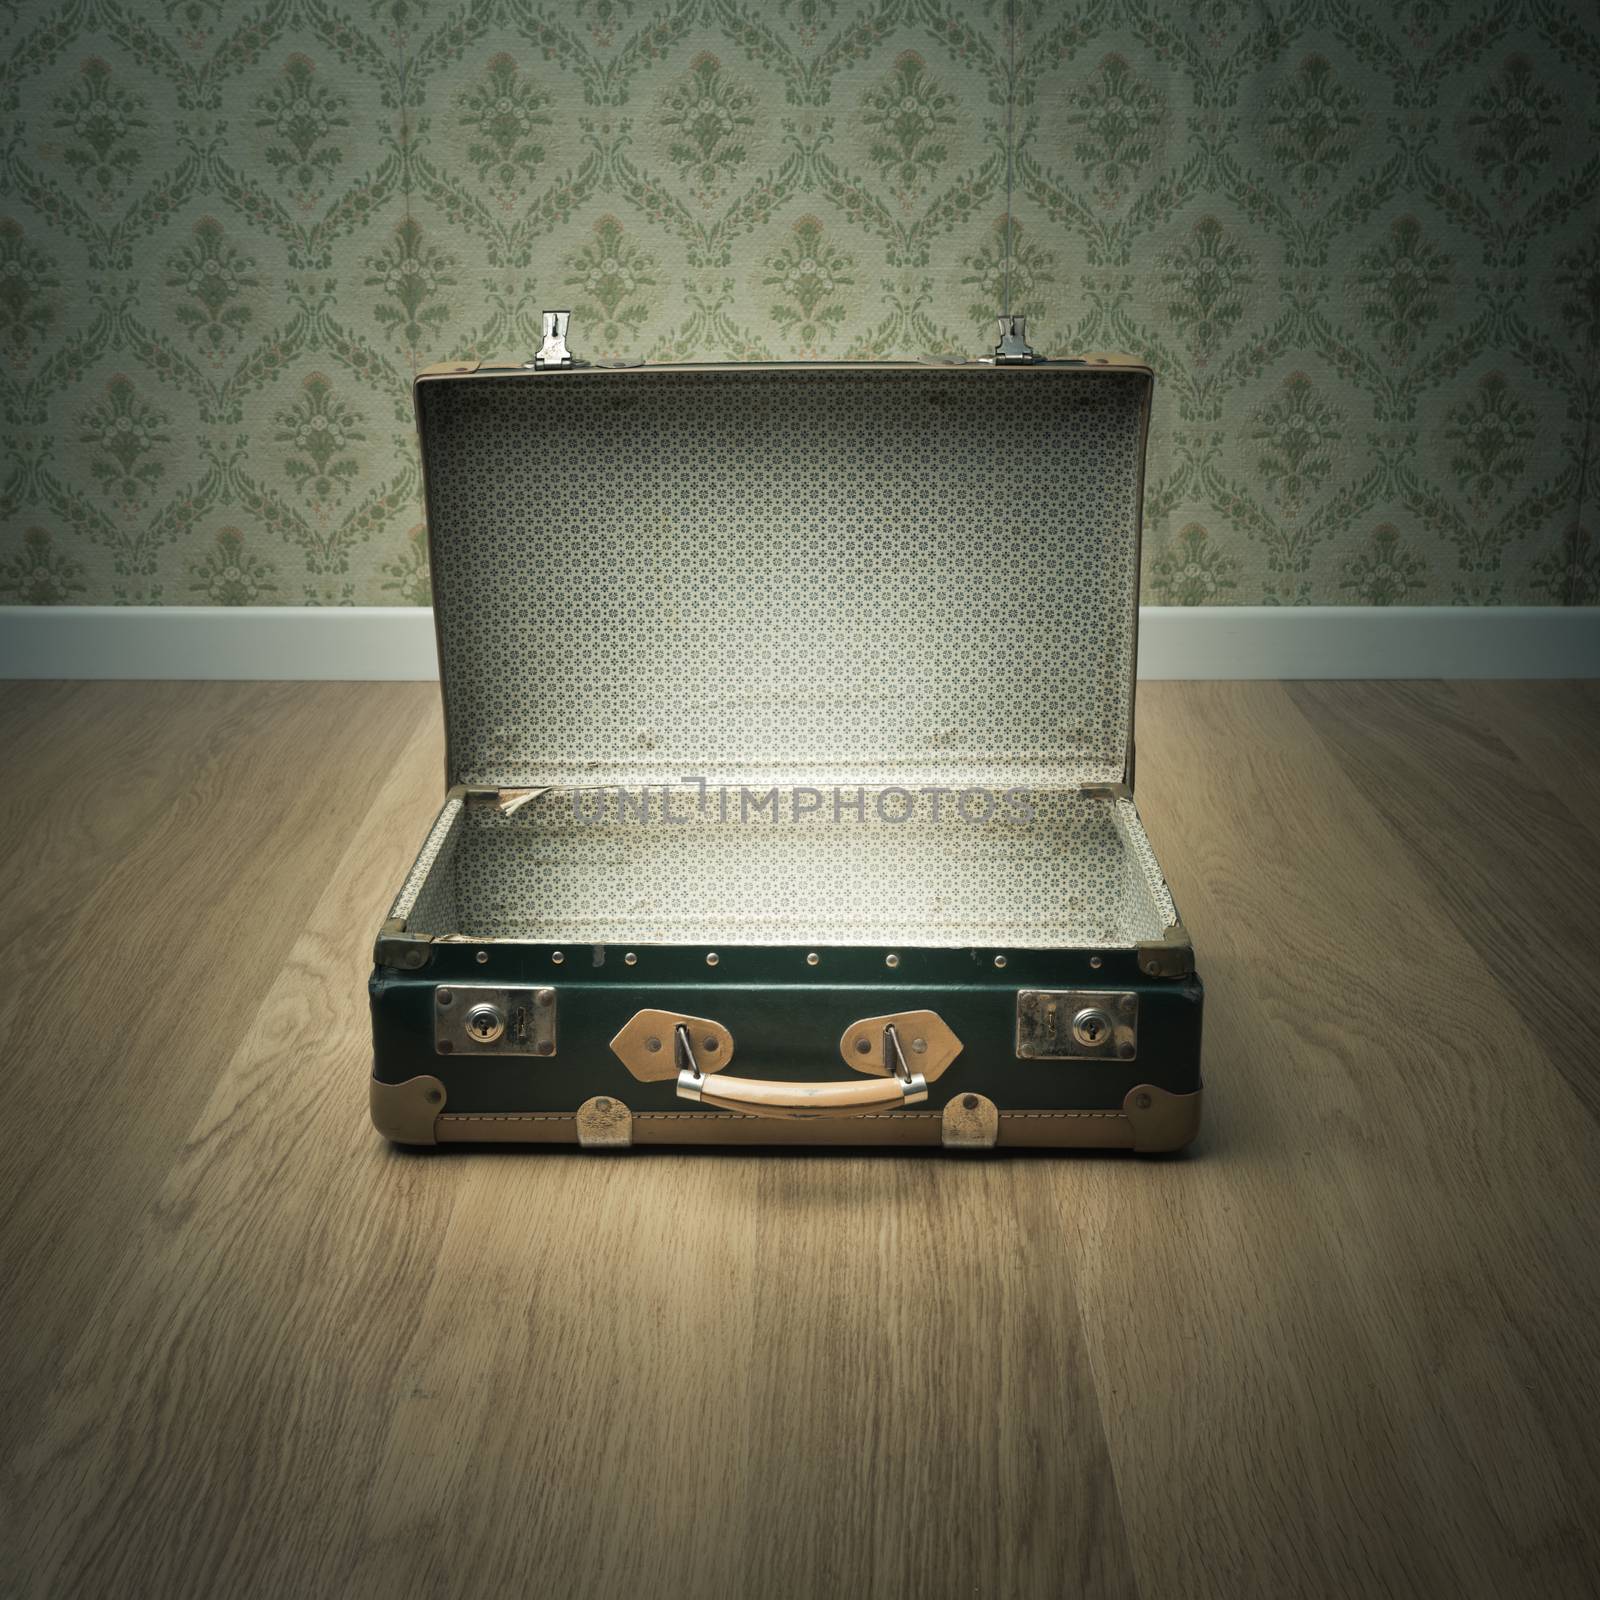 Open vintage suitcase by stokkete